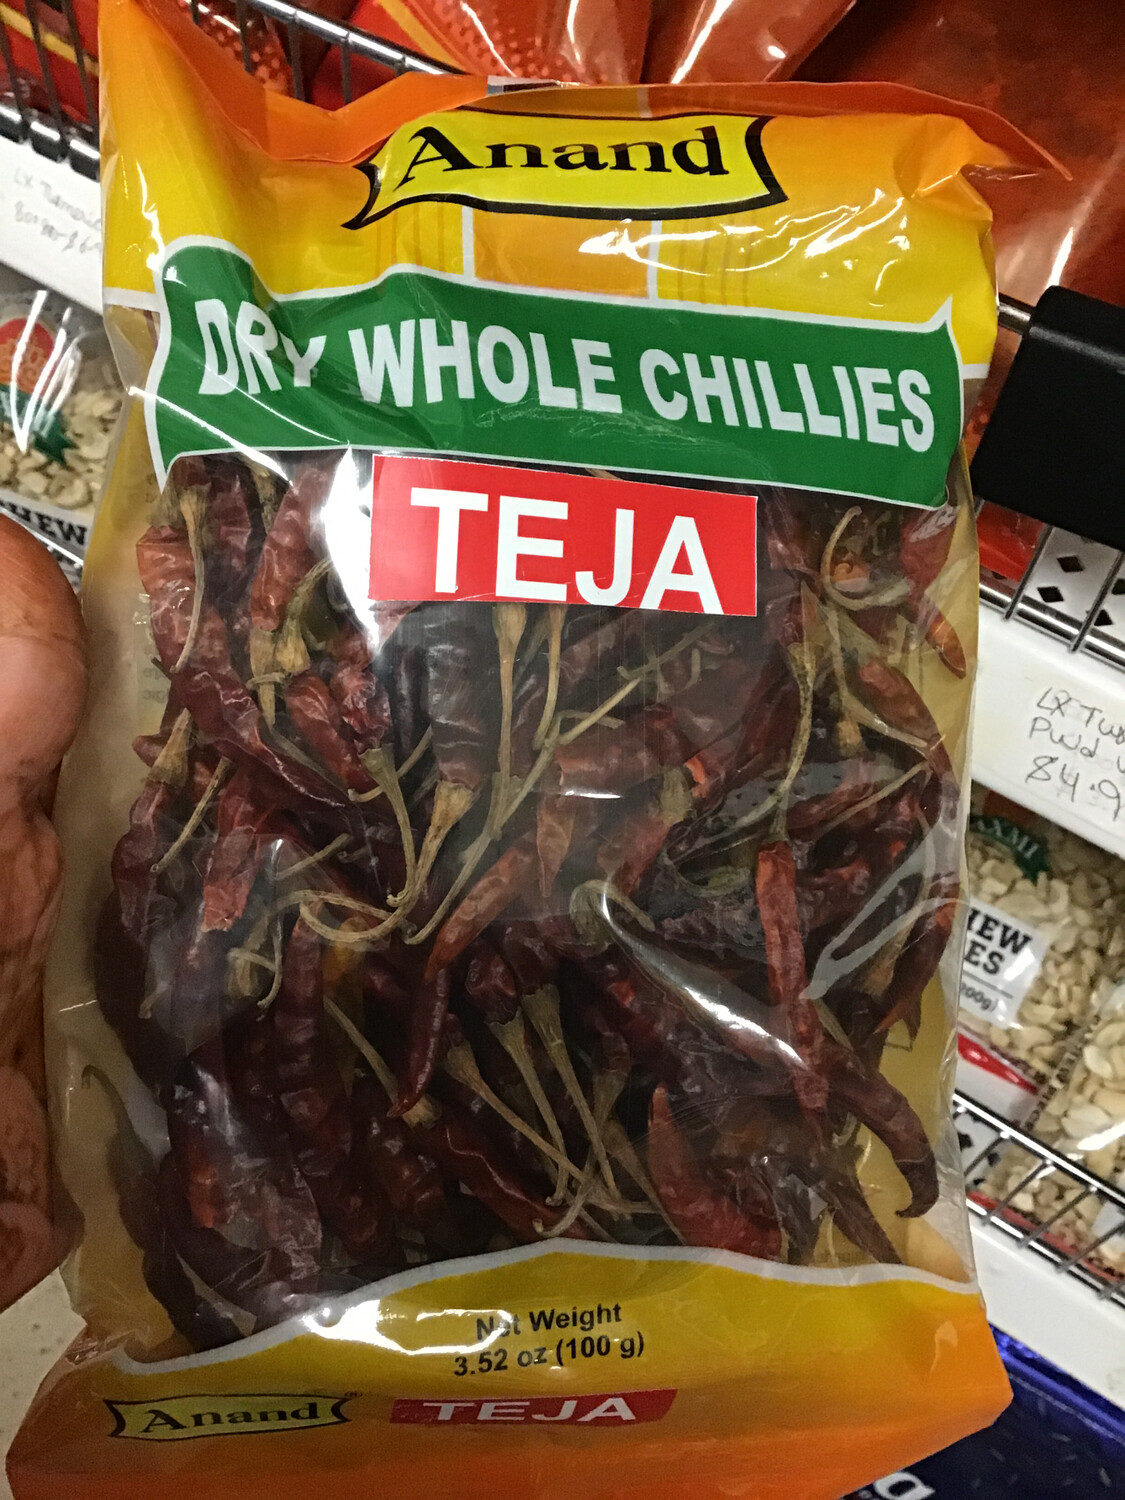 ANAND DRY WHOLE CHILLIES TEJA CHILLI 100G